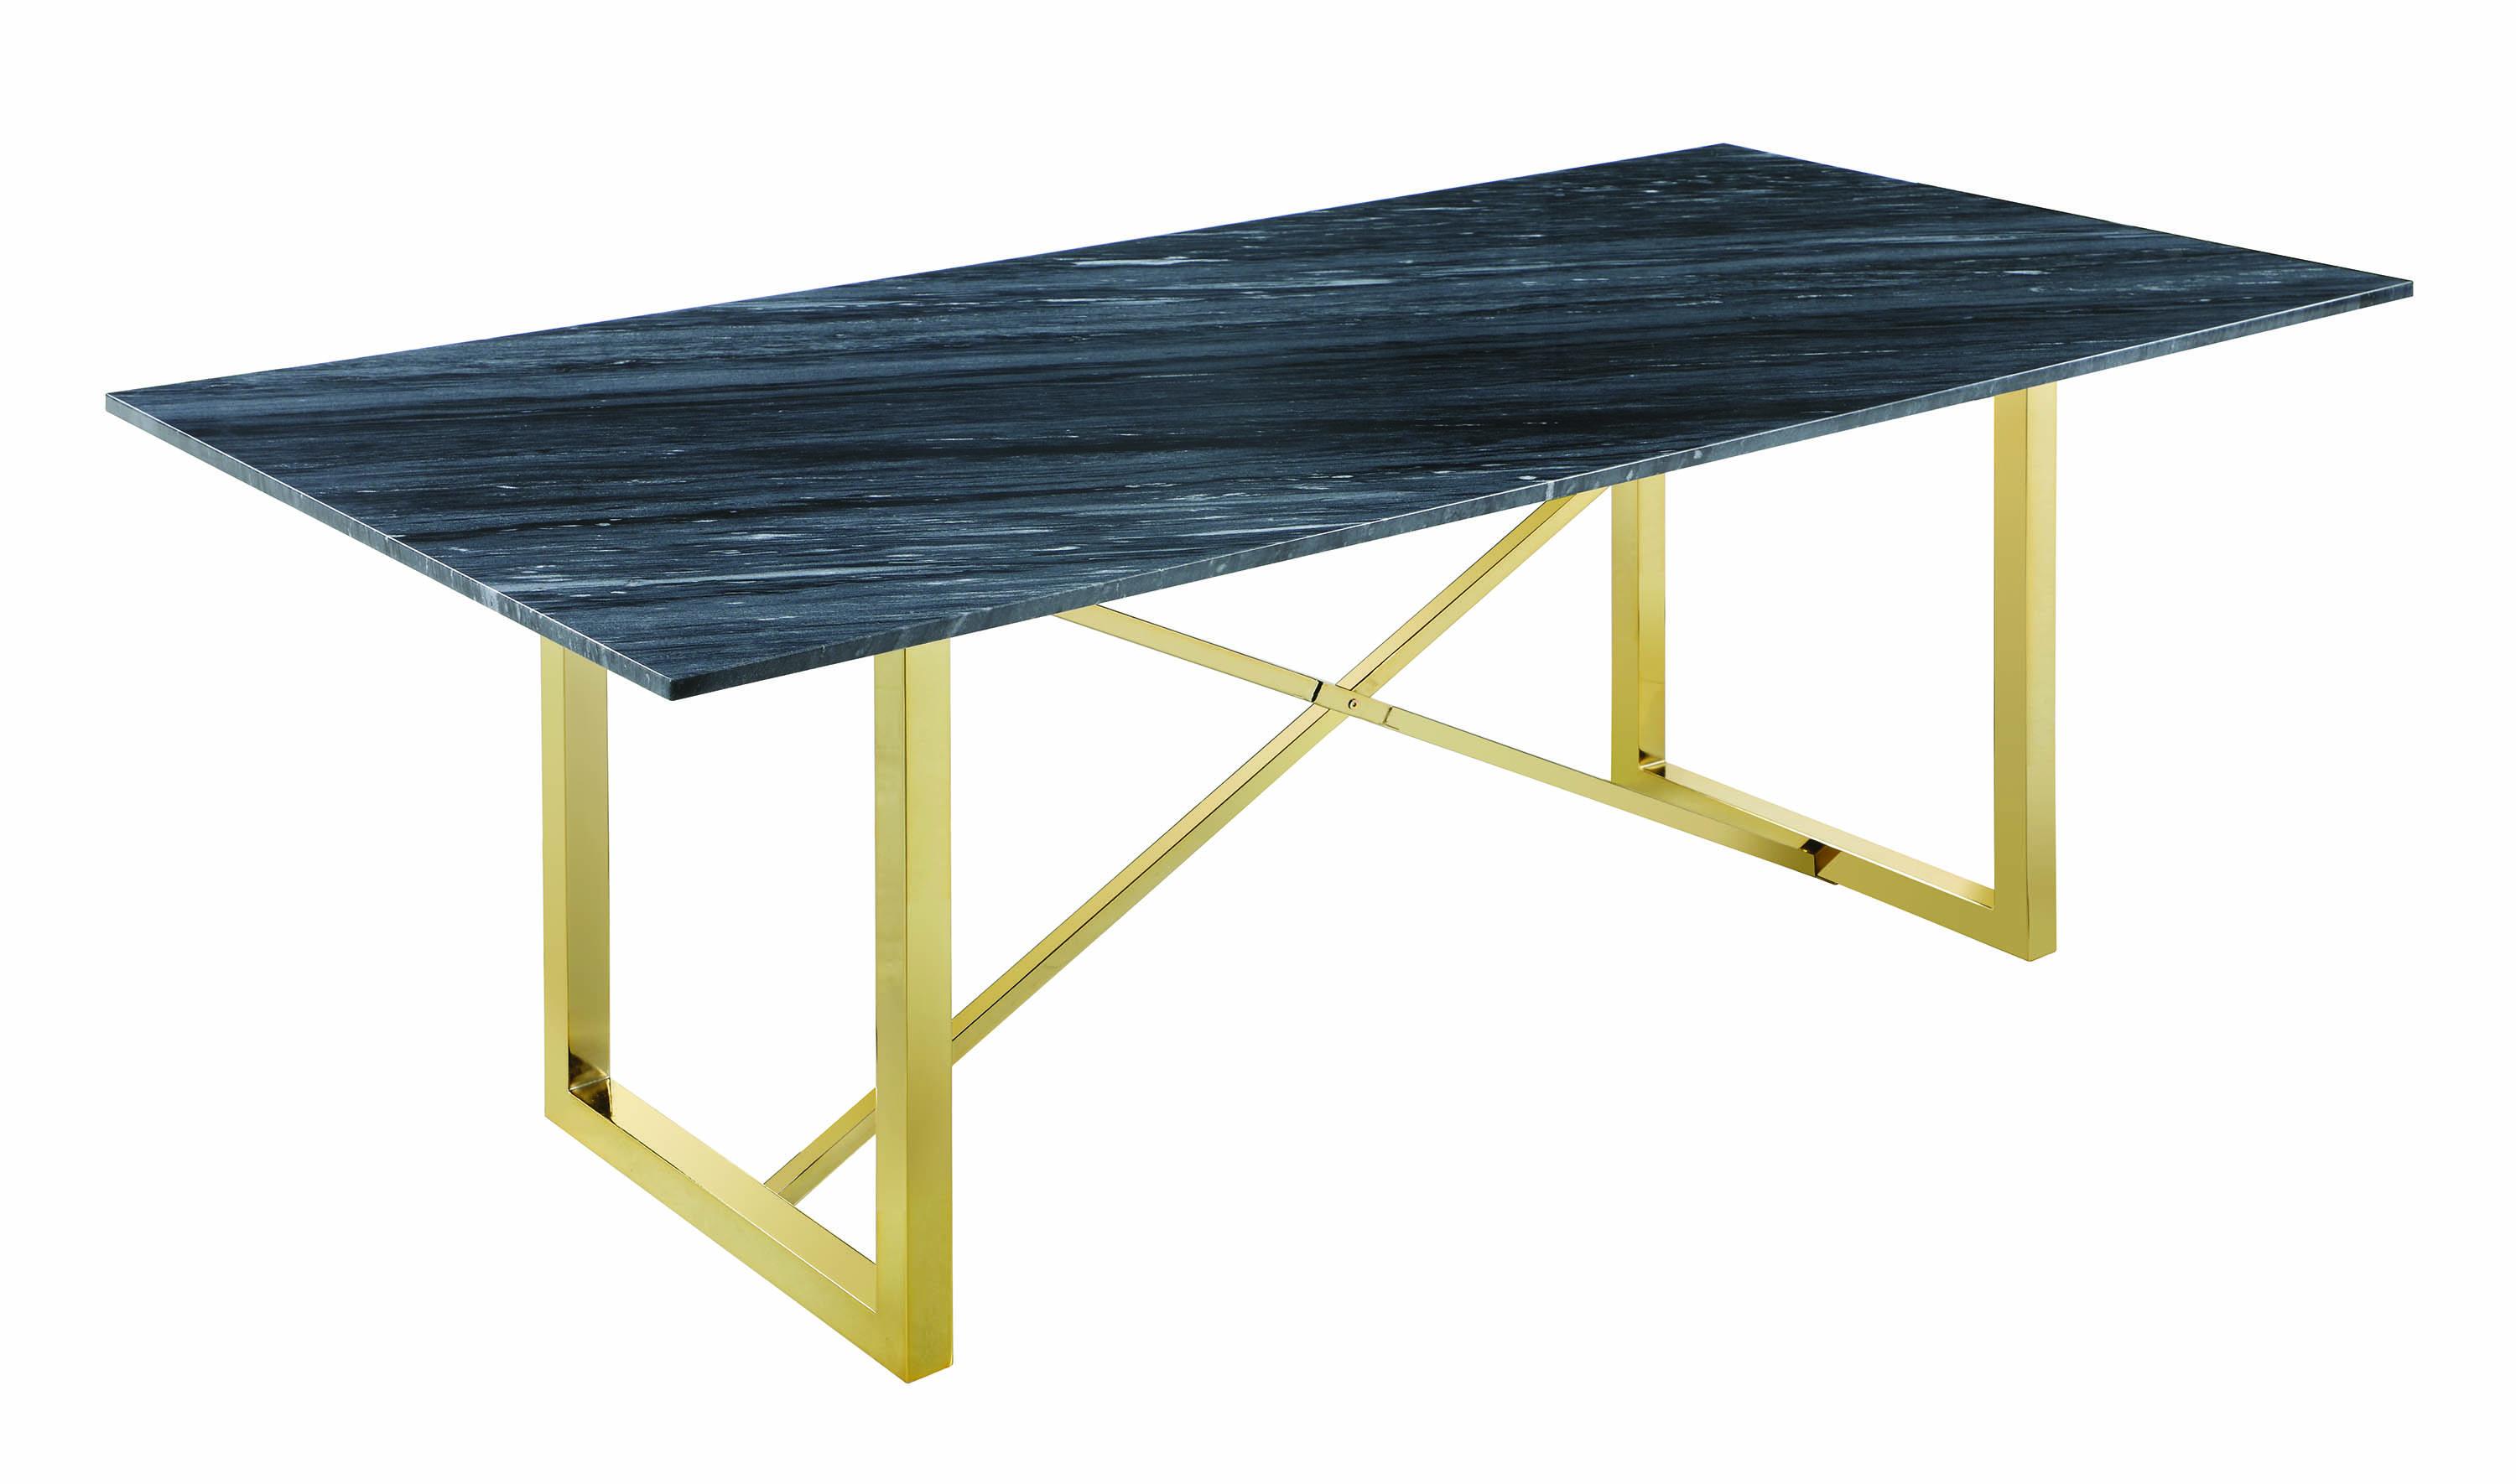 Modern Dining Table Arcade 109211 in Black, Gold, White 